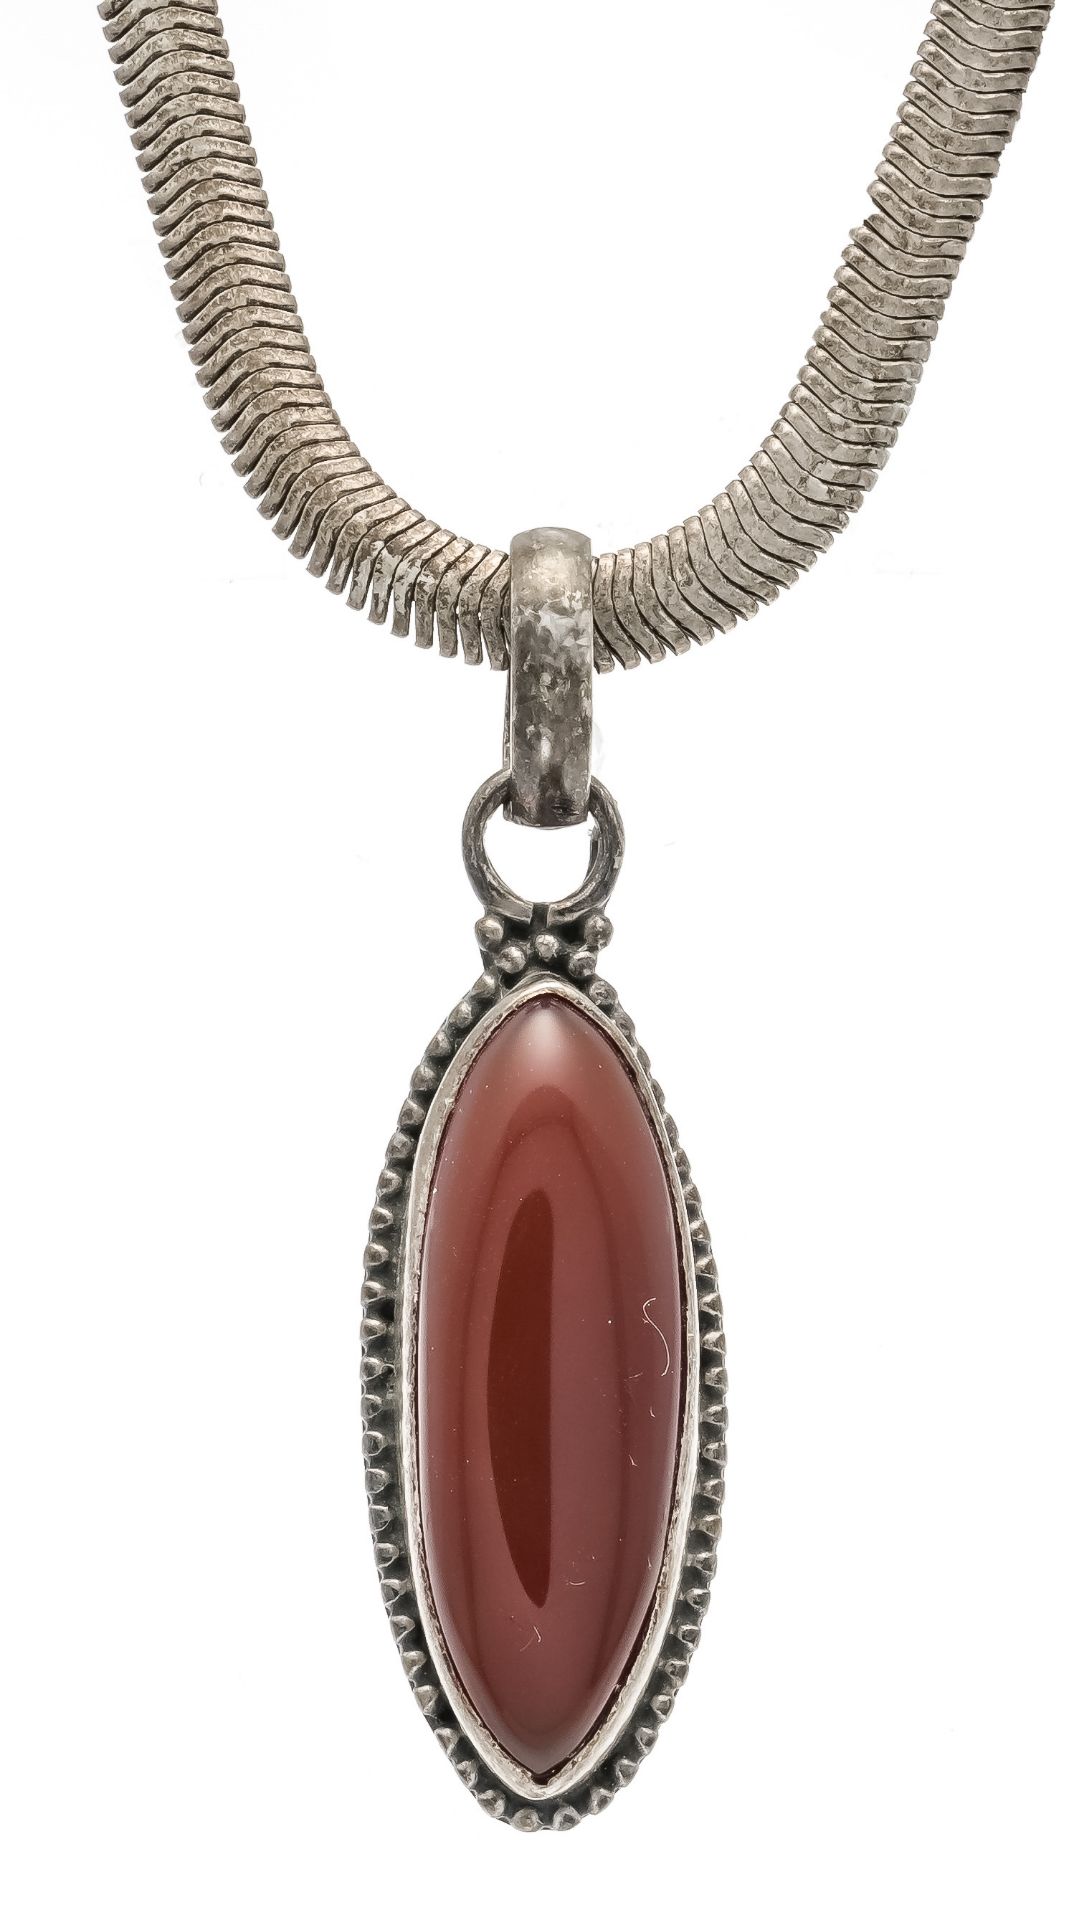 Carnelian pendant silver 925/000 with an oval carnelian cabochon 26 x 9 mm, l. 45 mm, on silver